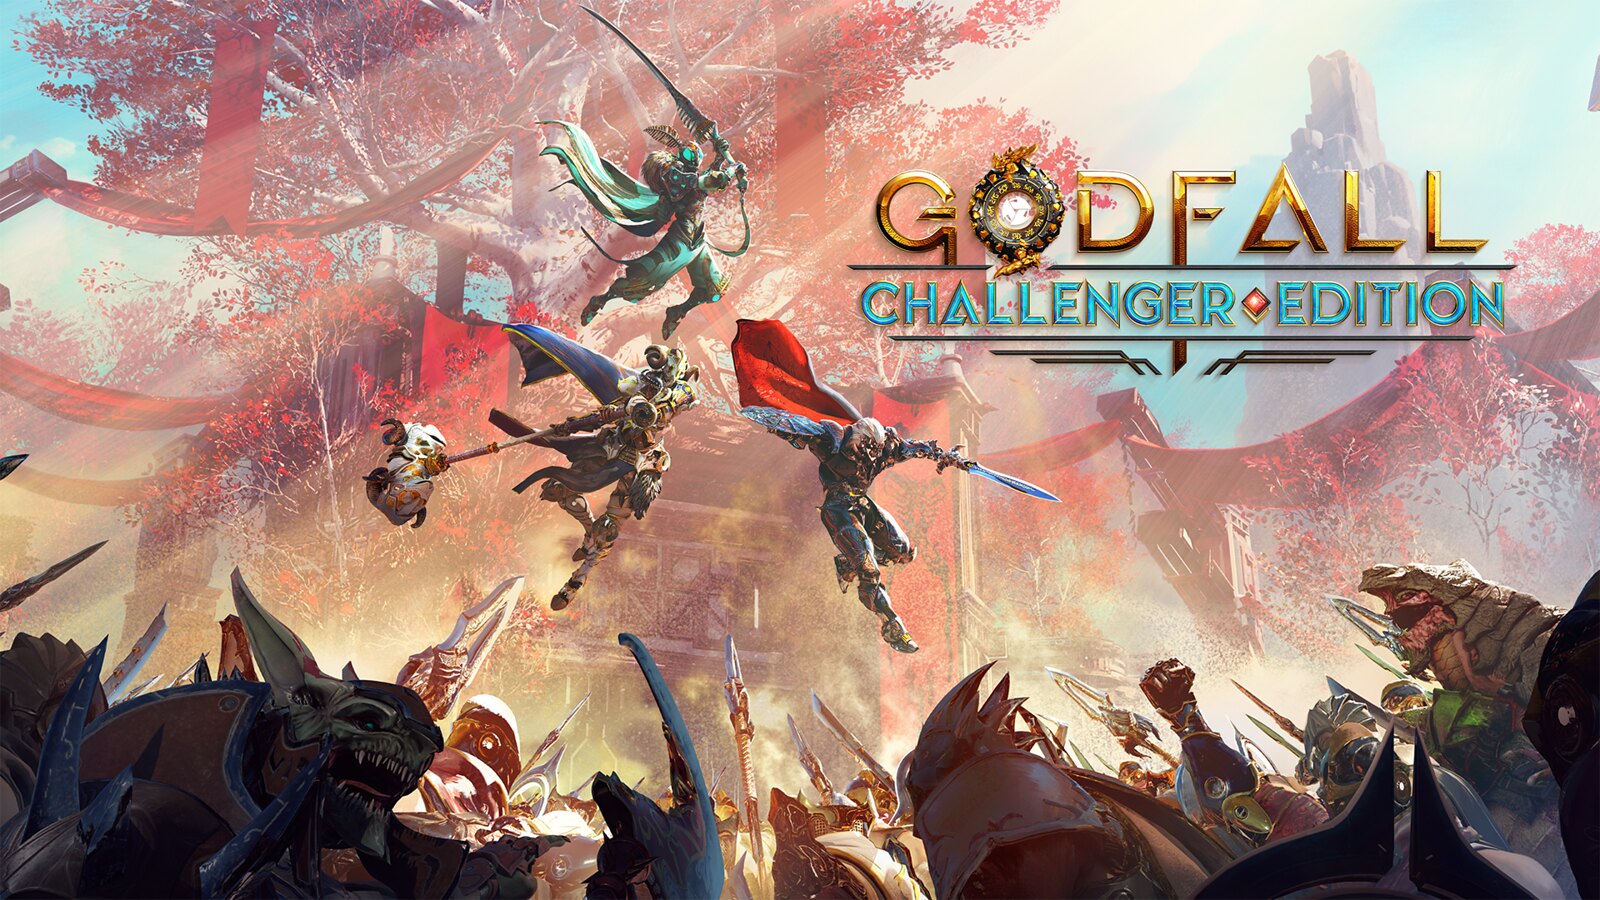 Is Godfall Challenger Edition Worth Trying? 5